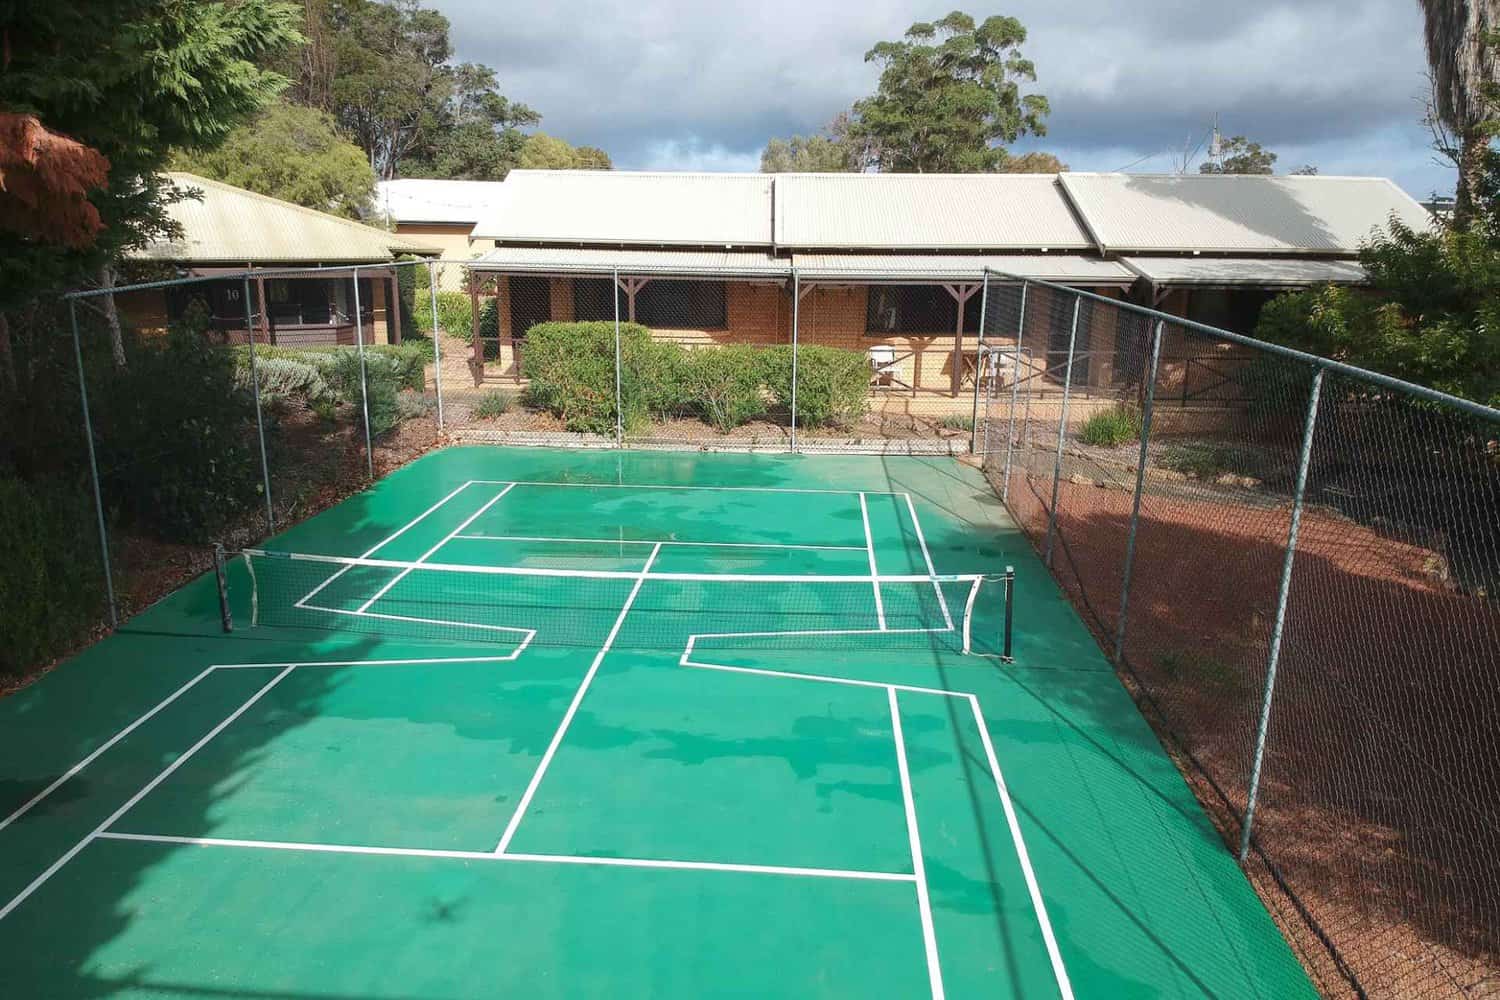 A private tennis court surrounded by lush greenery, perfect for a leisurely vacation in Western Australia.